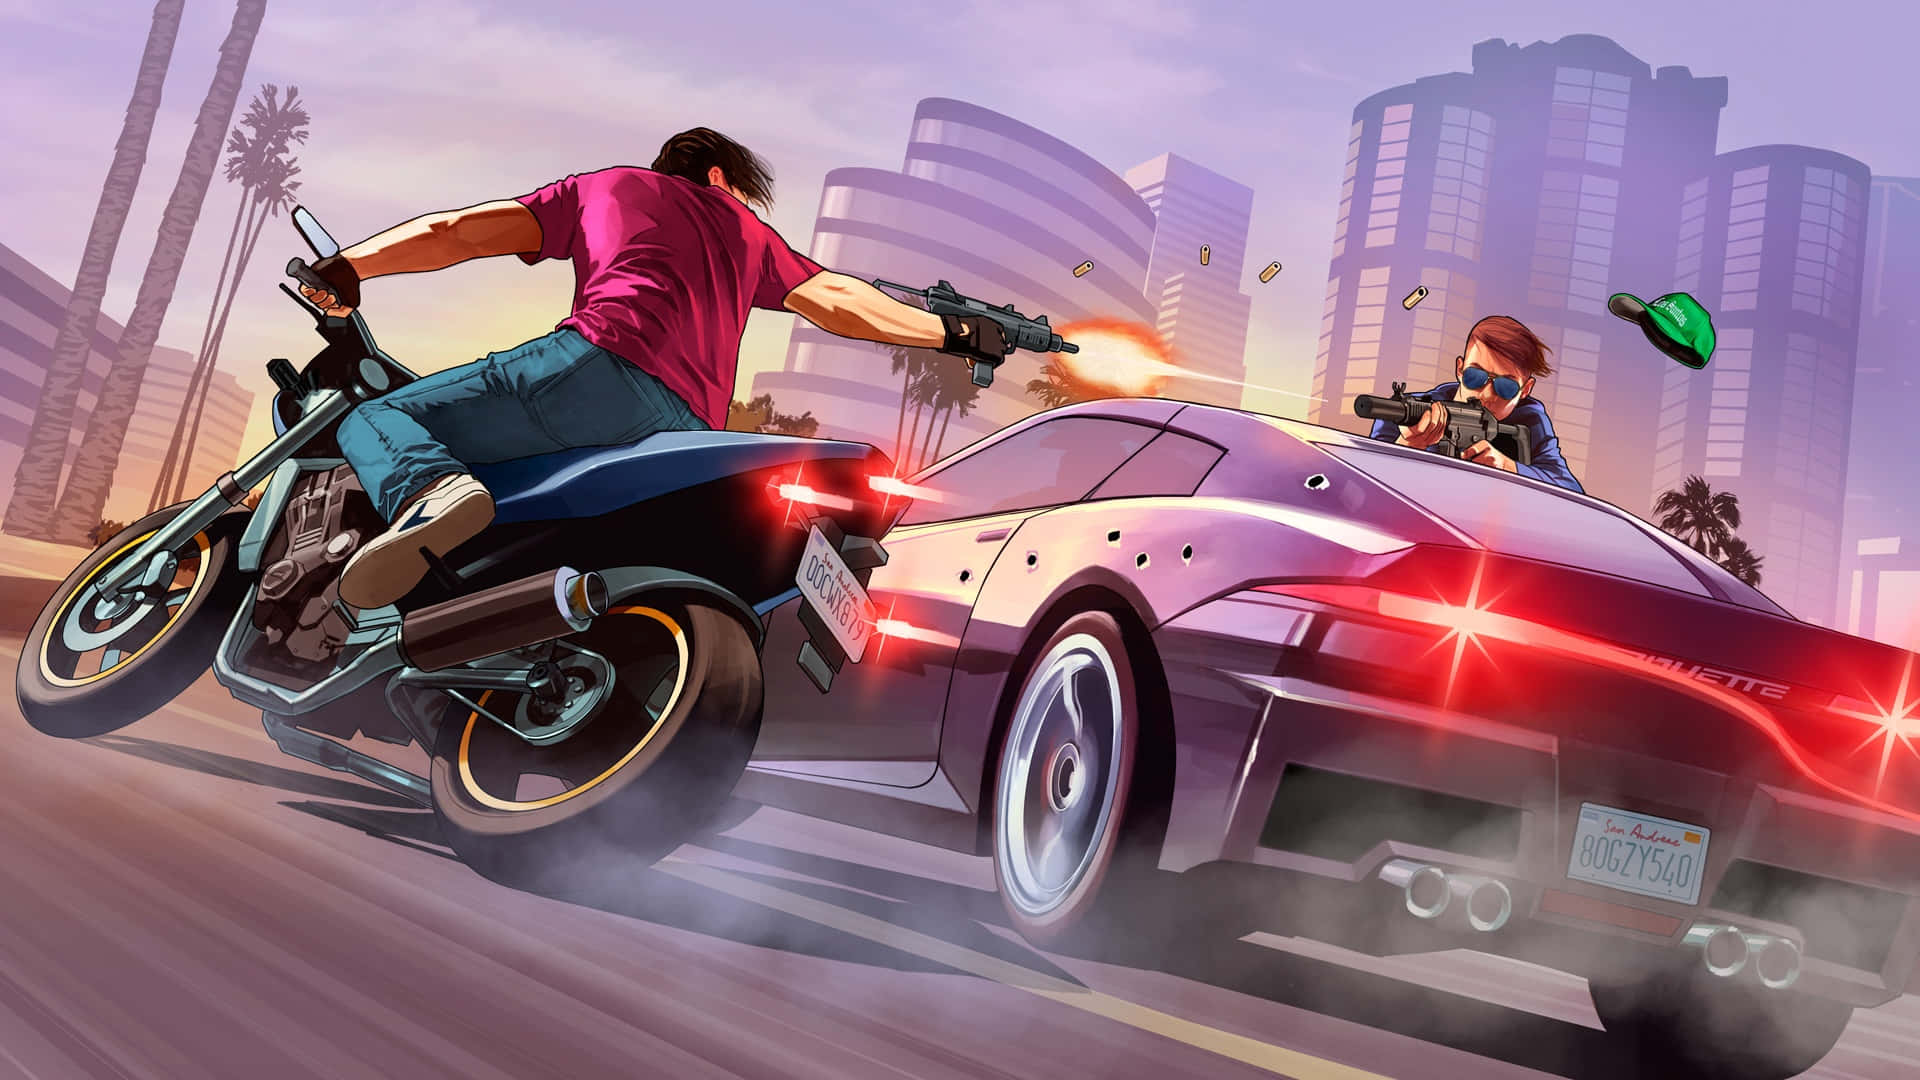 Join the World of Grand Theft Auto 5